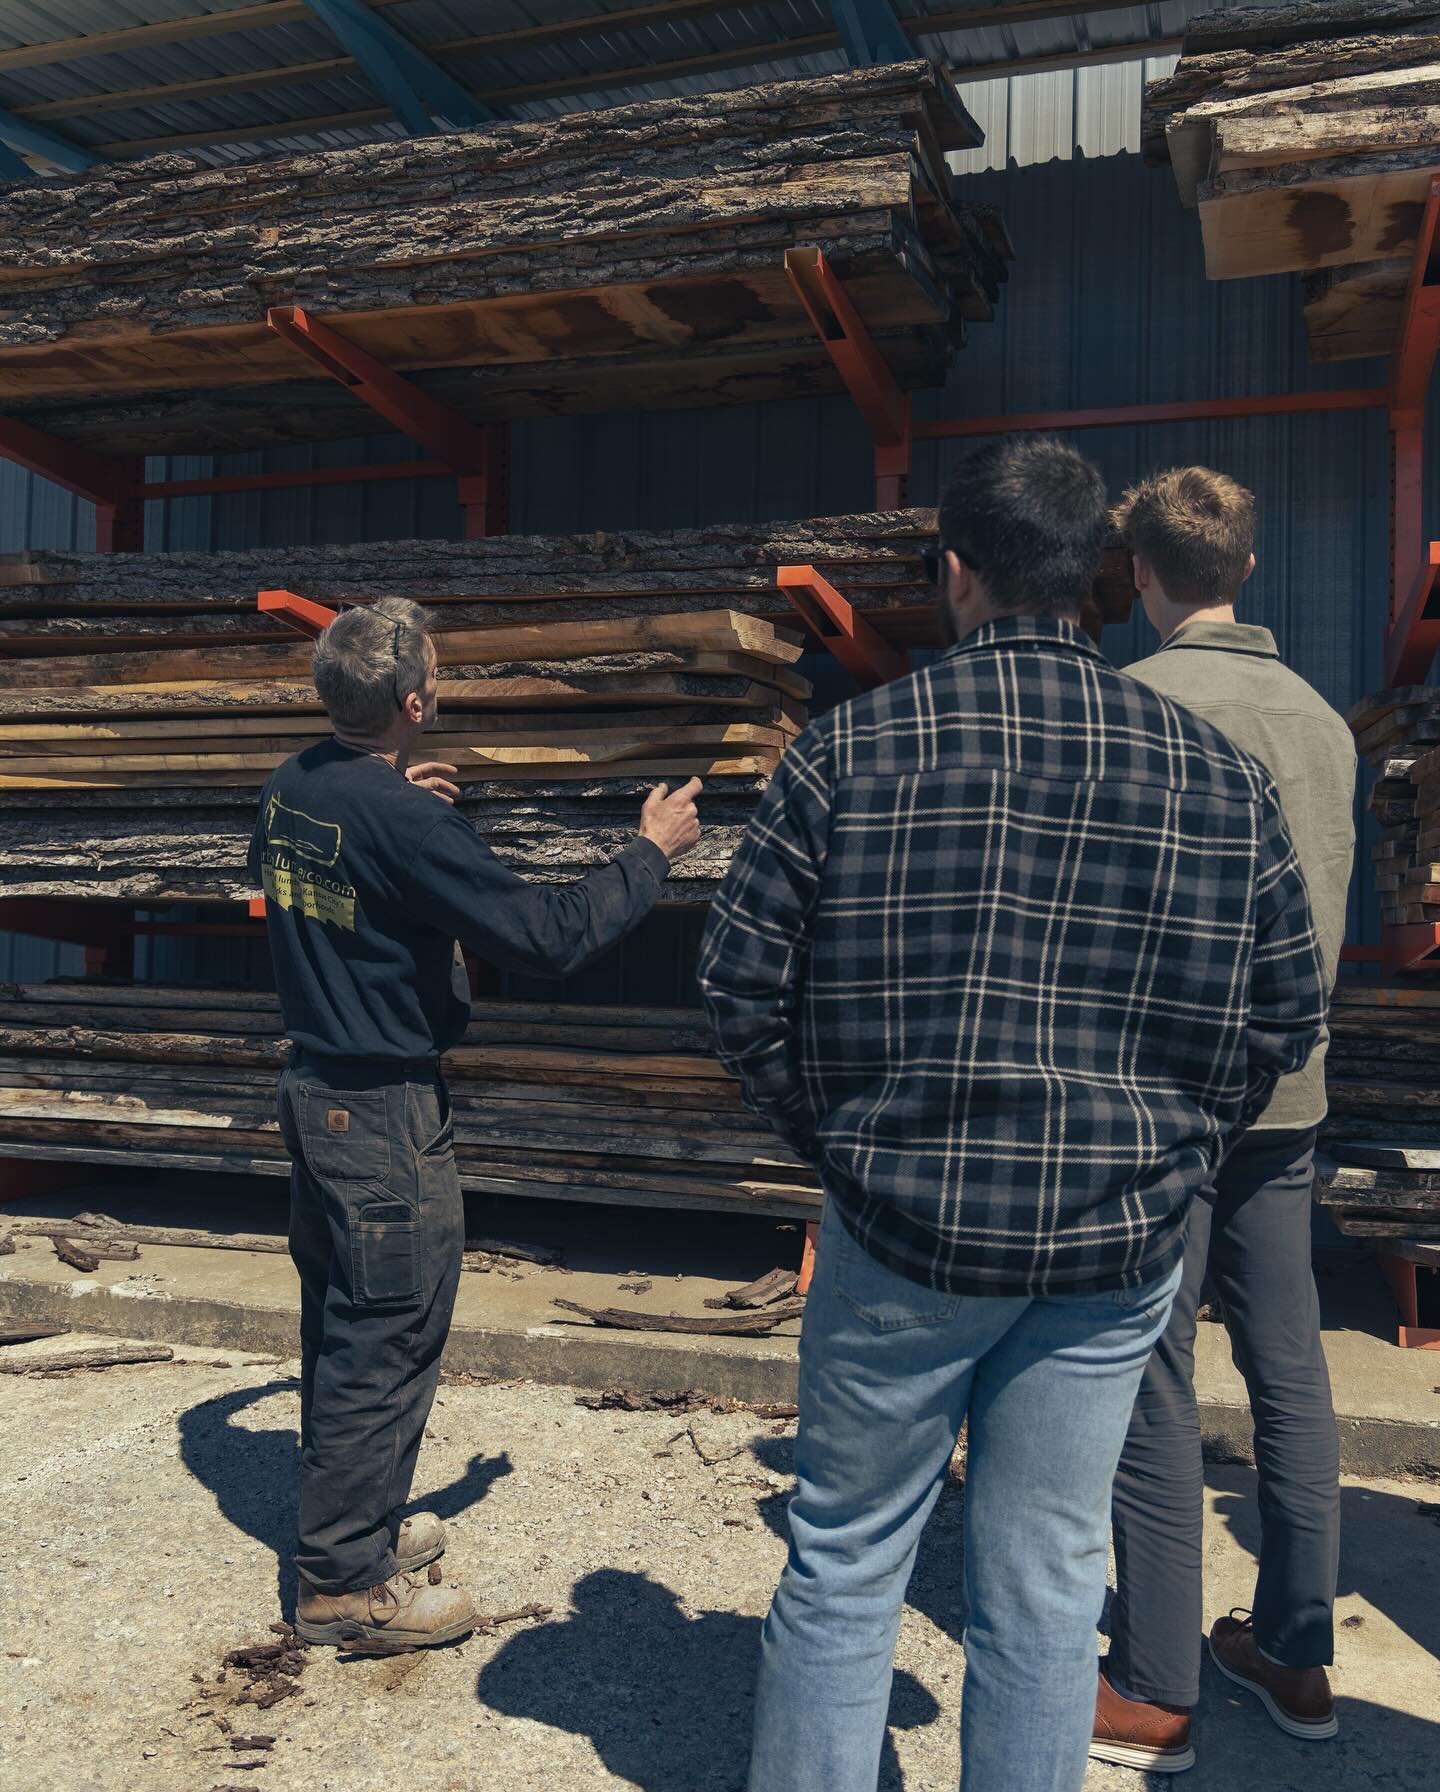 Take advantage of this weather and come explore our lumber yard! 🪵✨

All our wood comes from Kansas City trees, repurposed to reduce waste. Whether you&rsquo;re buying reclaimed lumber or looking for custom woodworking, we do it all right here at ou